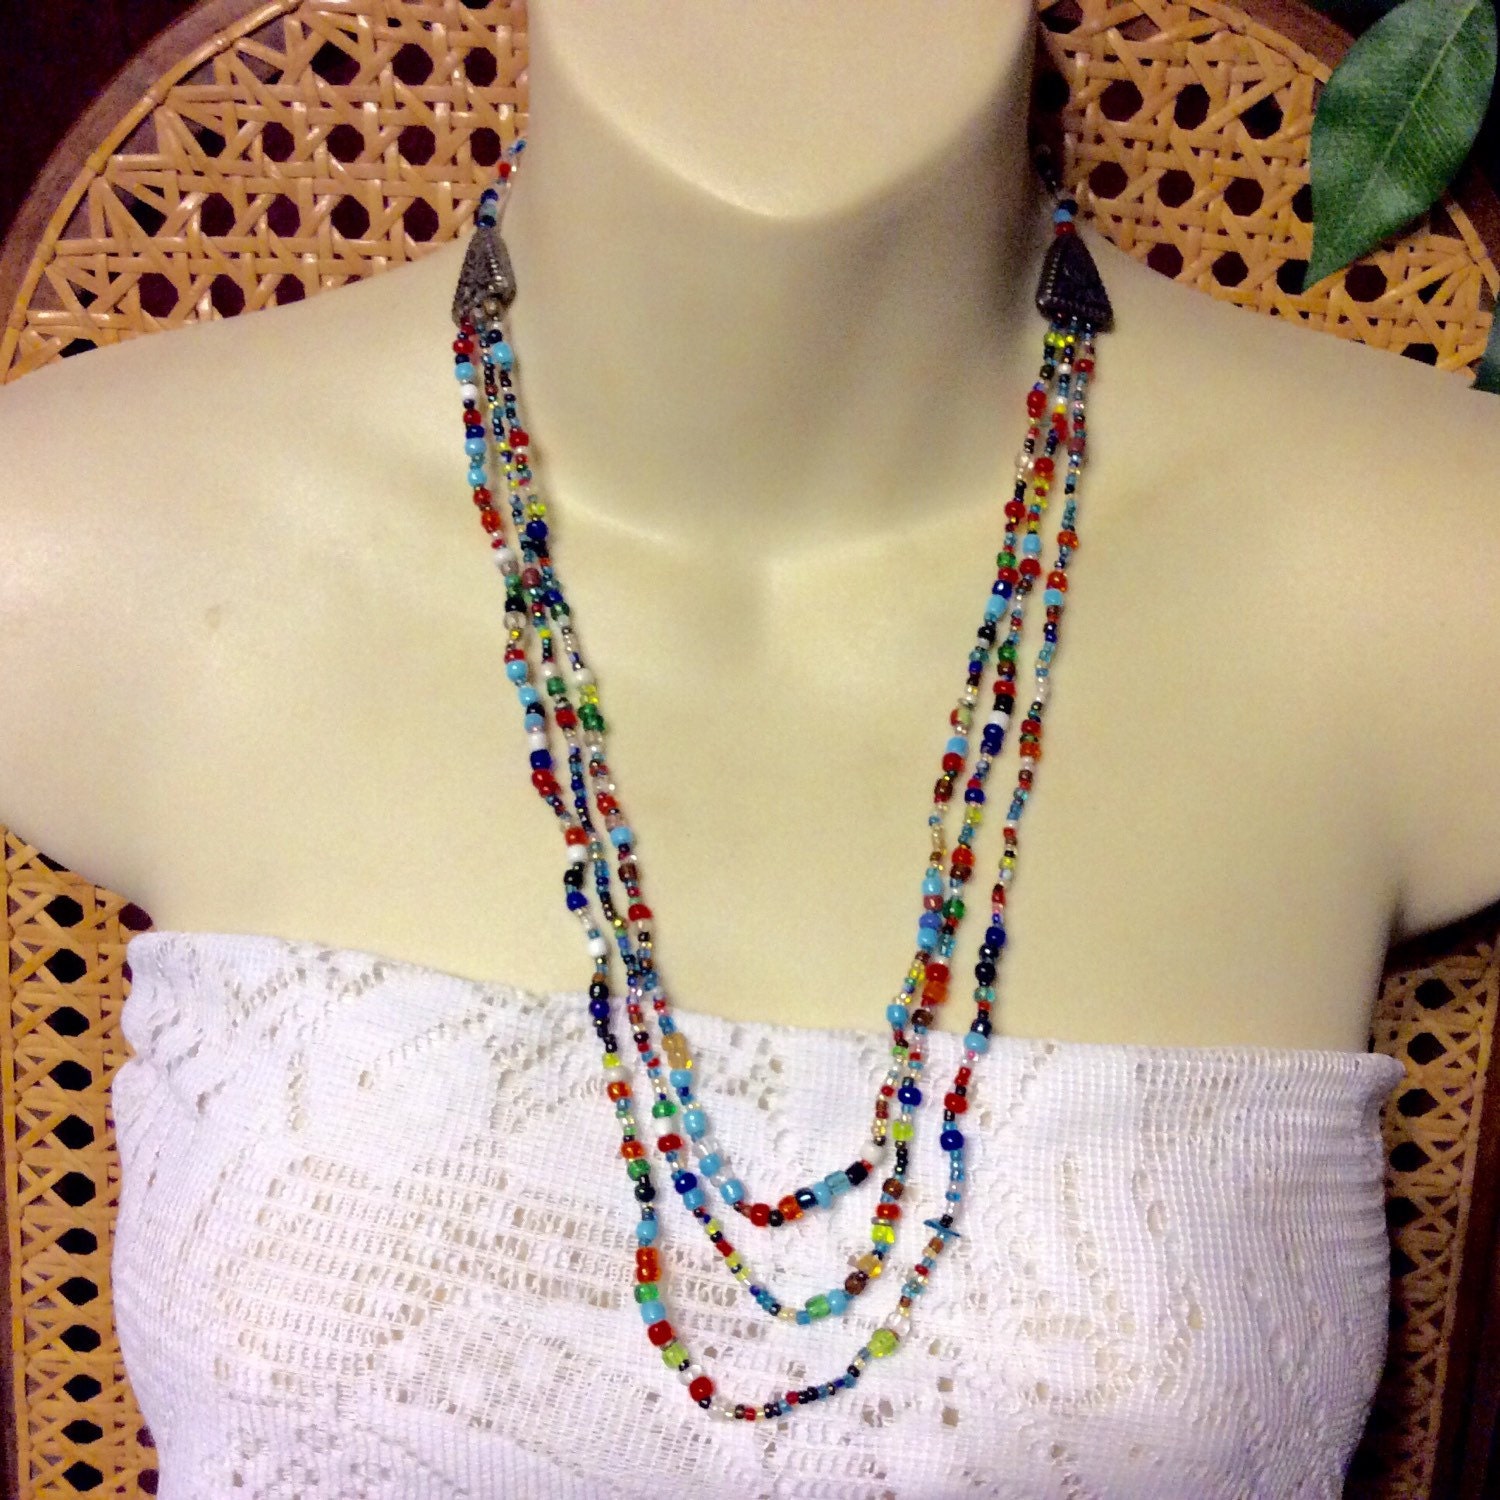 Glass Beads Micro Beads Multi Strand Necklace. - Etsy